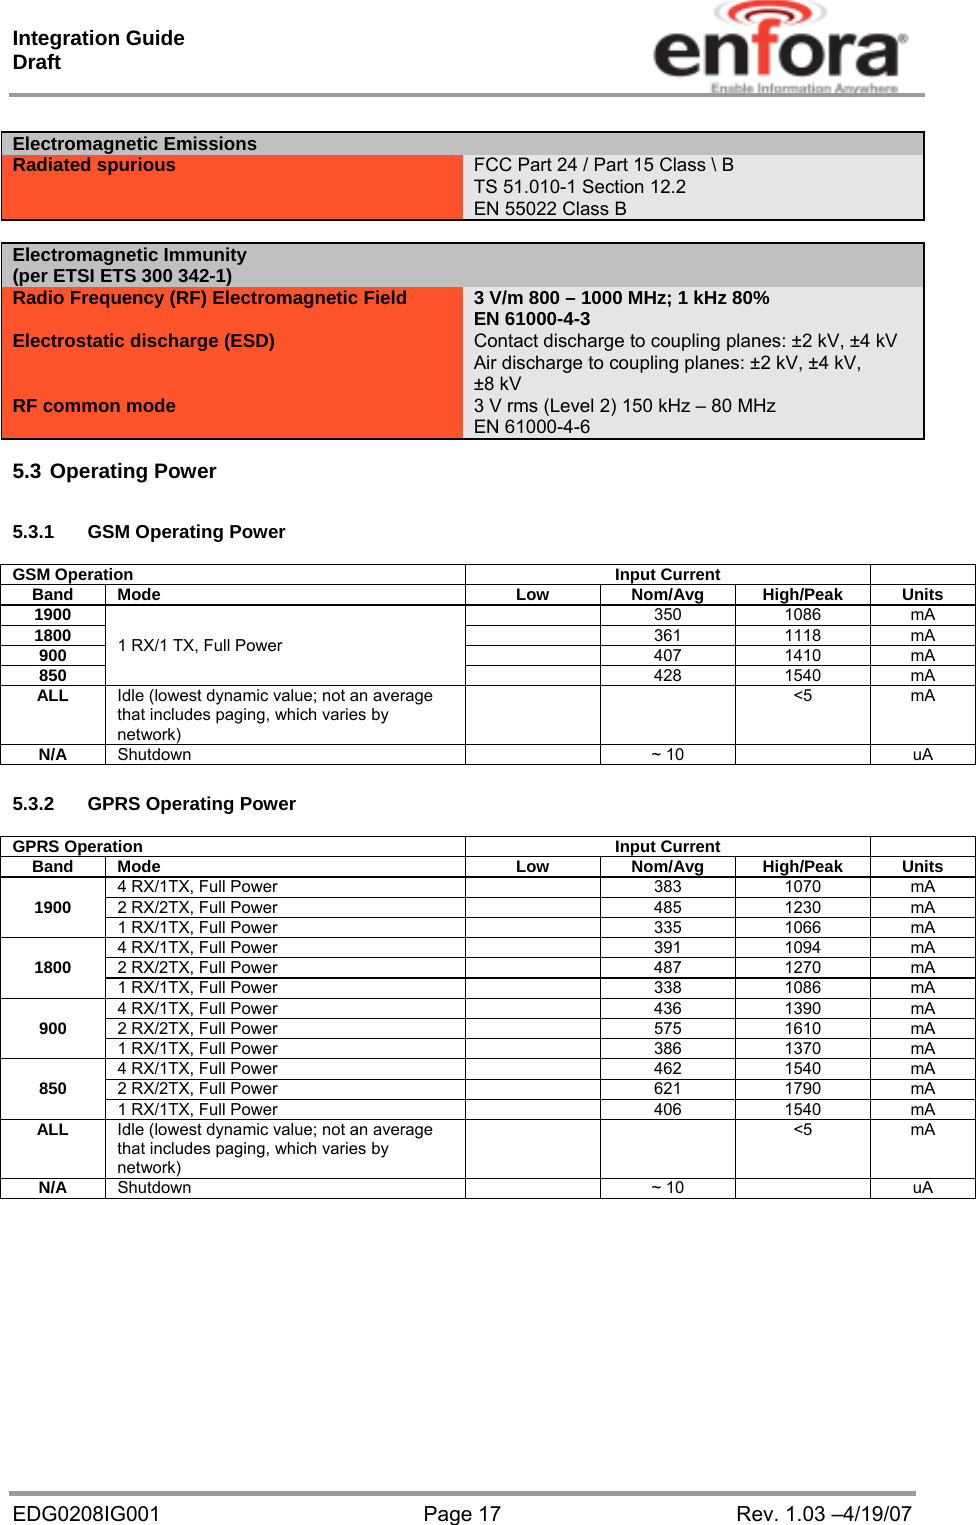 Integration Guide  Draft EDG0208IG001  Page 17  Rev. 1.03 –4/19/07  Electromagnetic Emissions Radiated spurious  FCC Part 24 / Part 15 Class \ B TS 51.010-1 Section 12.2 EN 55022 Class B  Electromagnetic Immunity  (per ETSI ETS 300 342-1) Radio Frequency (RF) Electromagnetic Field 3 V/m 800 –1000 MHz; 1 kHz 80% EN 61000-4-3 Electrostatic discharge (ESD)  Contact discharge to coupling planes: ±2 kV, ±4 kV Air discharge to coupling planes: ±2 kV, ±4 kV, ±8 kV RF common mode  3 V rms (Level 2) 150 kHz – 80 MHz EN 61000-4-6  5.3 Operating Power   5.3.1  GSM Operating Power  GSM Operation  Input Current   Band Mode  Low  Nom/Avg  High/Peak  Units 1900 1 RX/1 TX, Full Power  350 1086 mA 1800   361 1118 mA 900   407 1410 mA 850   428 1540 mA ALL  Idle (lowest dynamic value; not an average that includes paging, which varies by network)   &lt;5 mA N/A  Shutdown    ~ 10     uA  5.3.2  GPRS Operating Power  GPRS Operation  Input Current   Band Mode  Low  Nom/Avg  High/Peak  Units 1900  4 RX/1TX, Full Power    383  1070  mA 2 RX/2TX, Full Power    485  1230  mA 1 RX/1TX, Full Power    335  1066  mA 1800  4 RX/1TX, Full Power    391  1094  mA 2 RX/2TX, Full Power    487  1270  mA 1 RX/1TX, Full Power    338  1086  mA 900  4 RX/1TX, Full Power    436  1390  mA 2 RX/2TX, Full Power    575  1610  mA 1 RX/1TX, Full Power    386  1370  mA 850  4 RX/1TX, Full Power    462  1540  mA 2 RX/2TX, Full Power    621  1790  mA 1 RX/1TX, Full Power    406  1540  mA ALL  Idle (lowest dynamic value; not an average that includes paging, which varies by network)   &lt;5 mA N/A  Shutdown    ~ 10     uA          